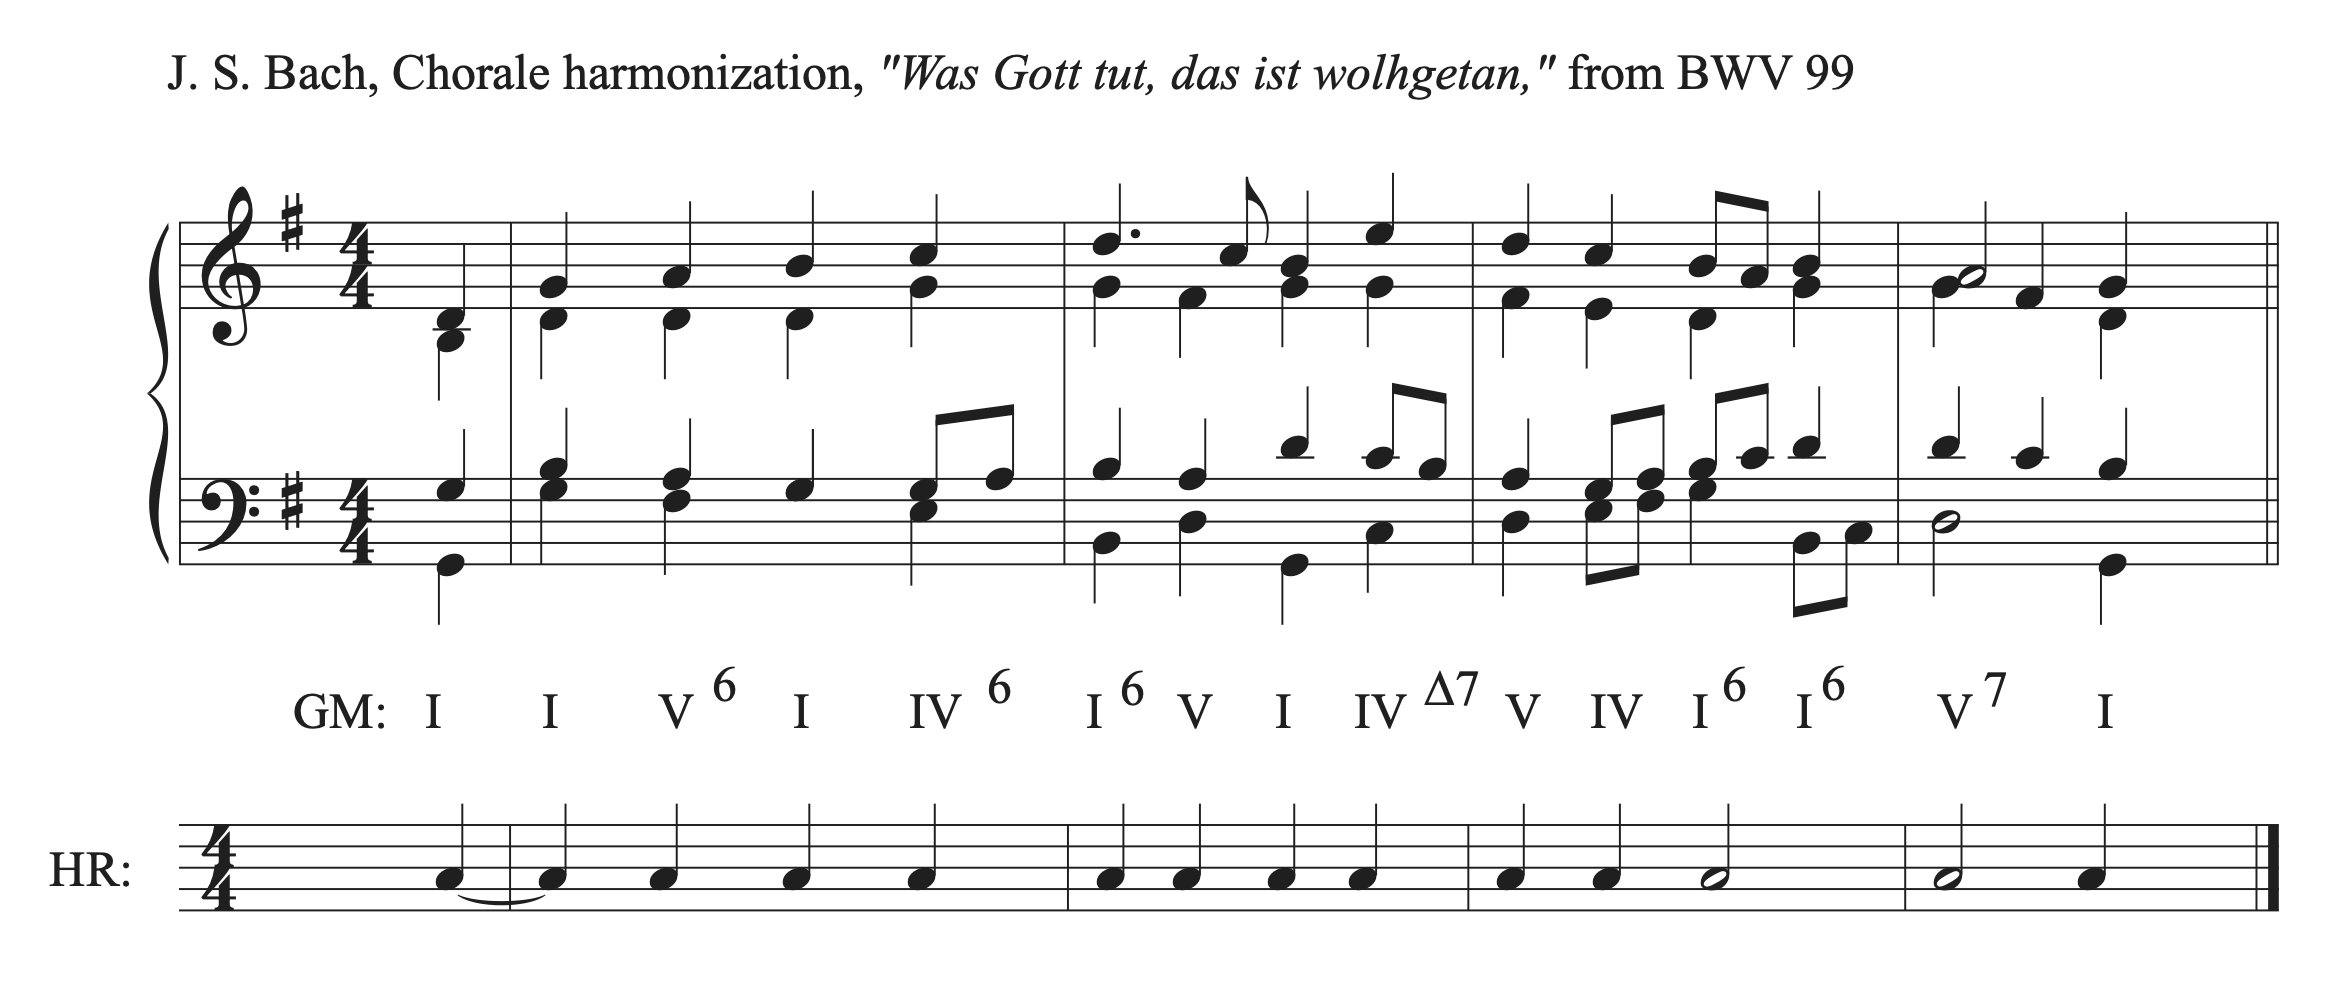 An excerpt of J.S. Bach's Chorale harmonization of "Was Gott tut, das ist wolhgetan" from BWV 99 is shown with Roman Numerals and harmonic rhythm.